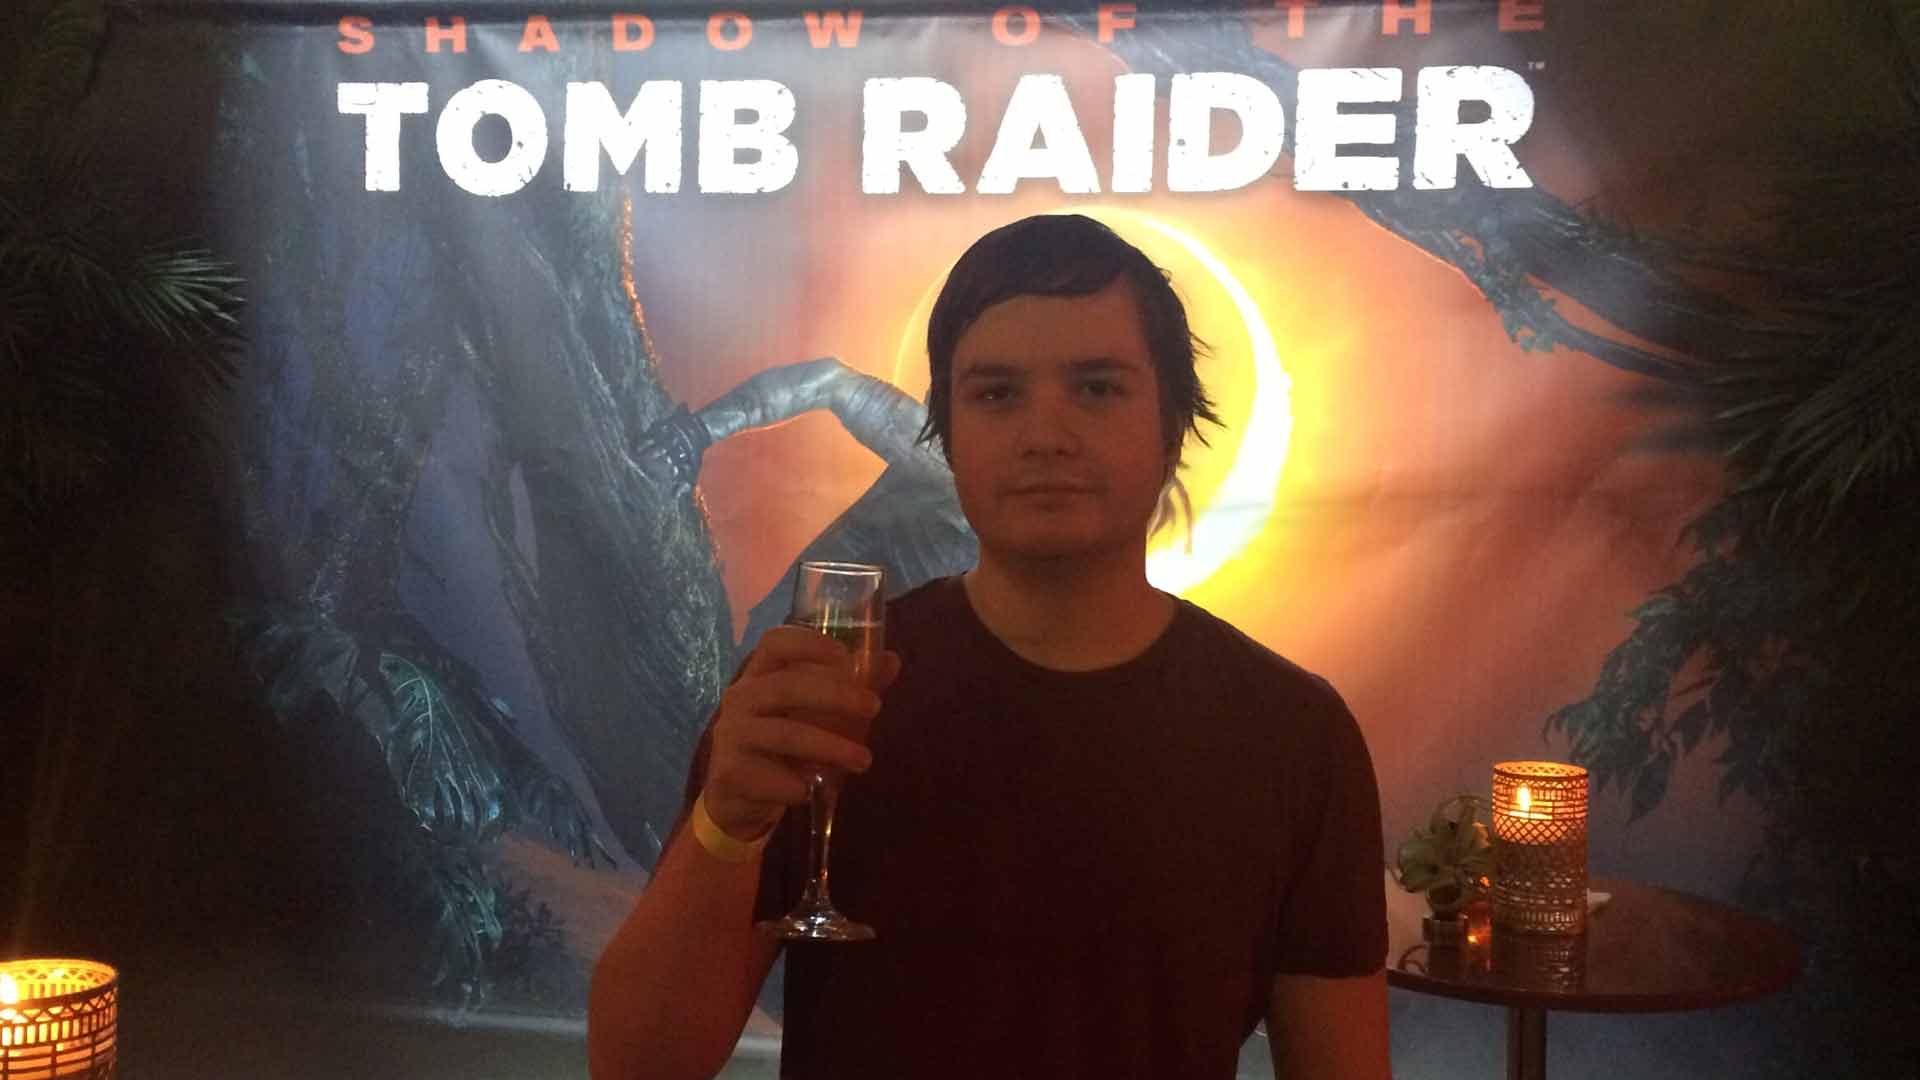 Jason Stettner Shadow of the Tomb Raider Montreal Event